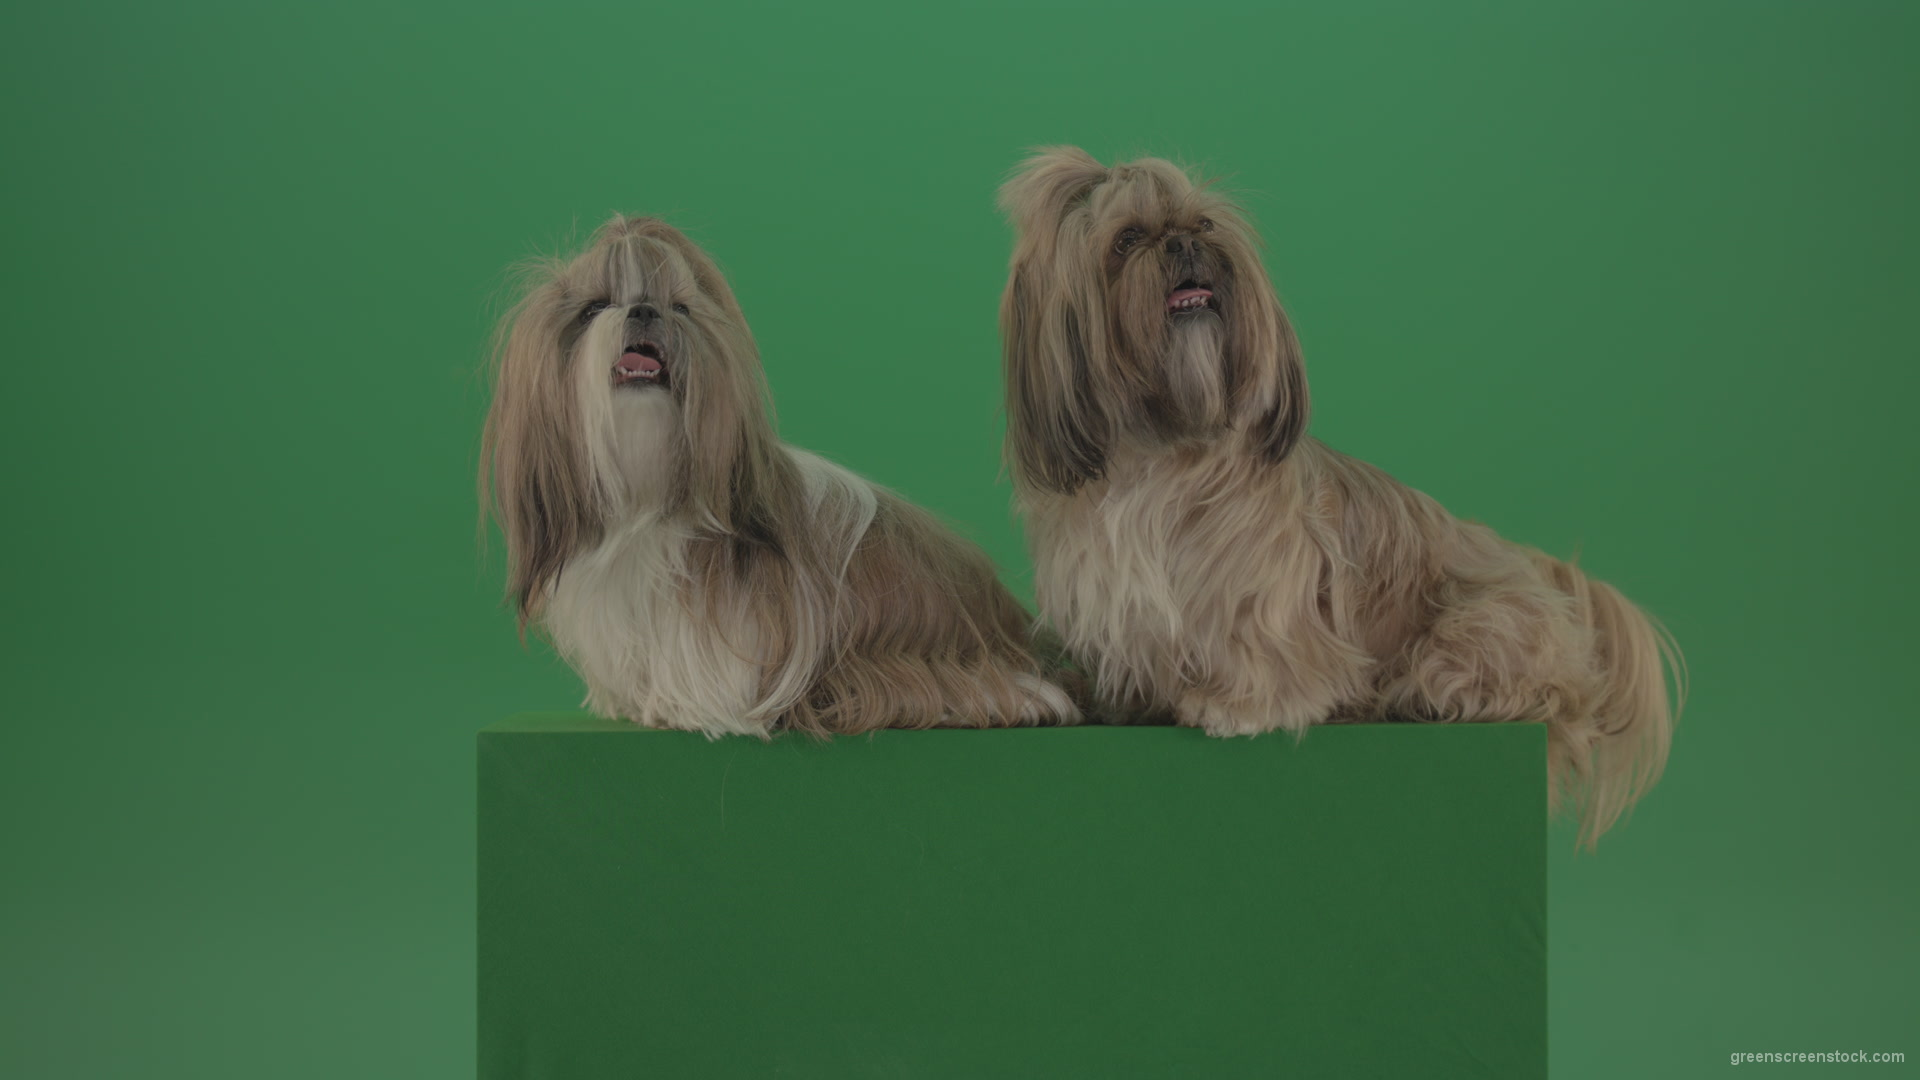 Awards-winners-Shih-tzu-fashion-luxury-expensive-dog-in-side-view-isolated-on-green-screen_007 Green Screen Stock